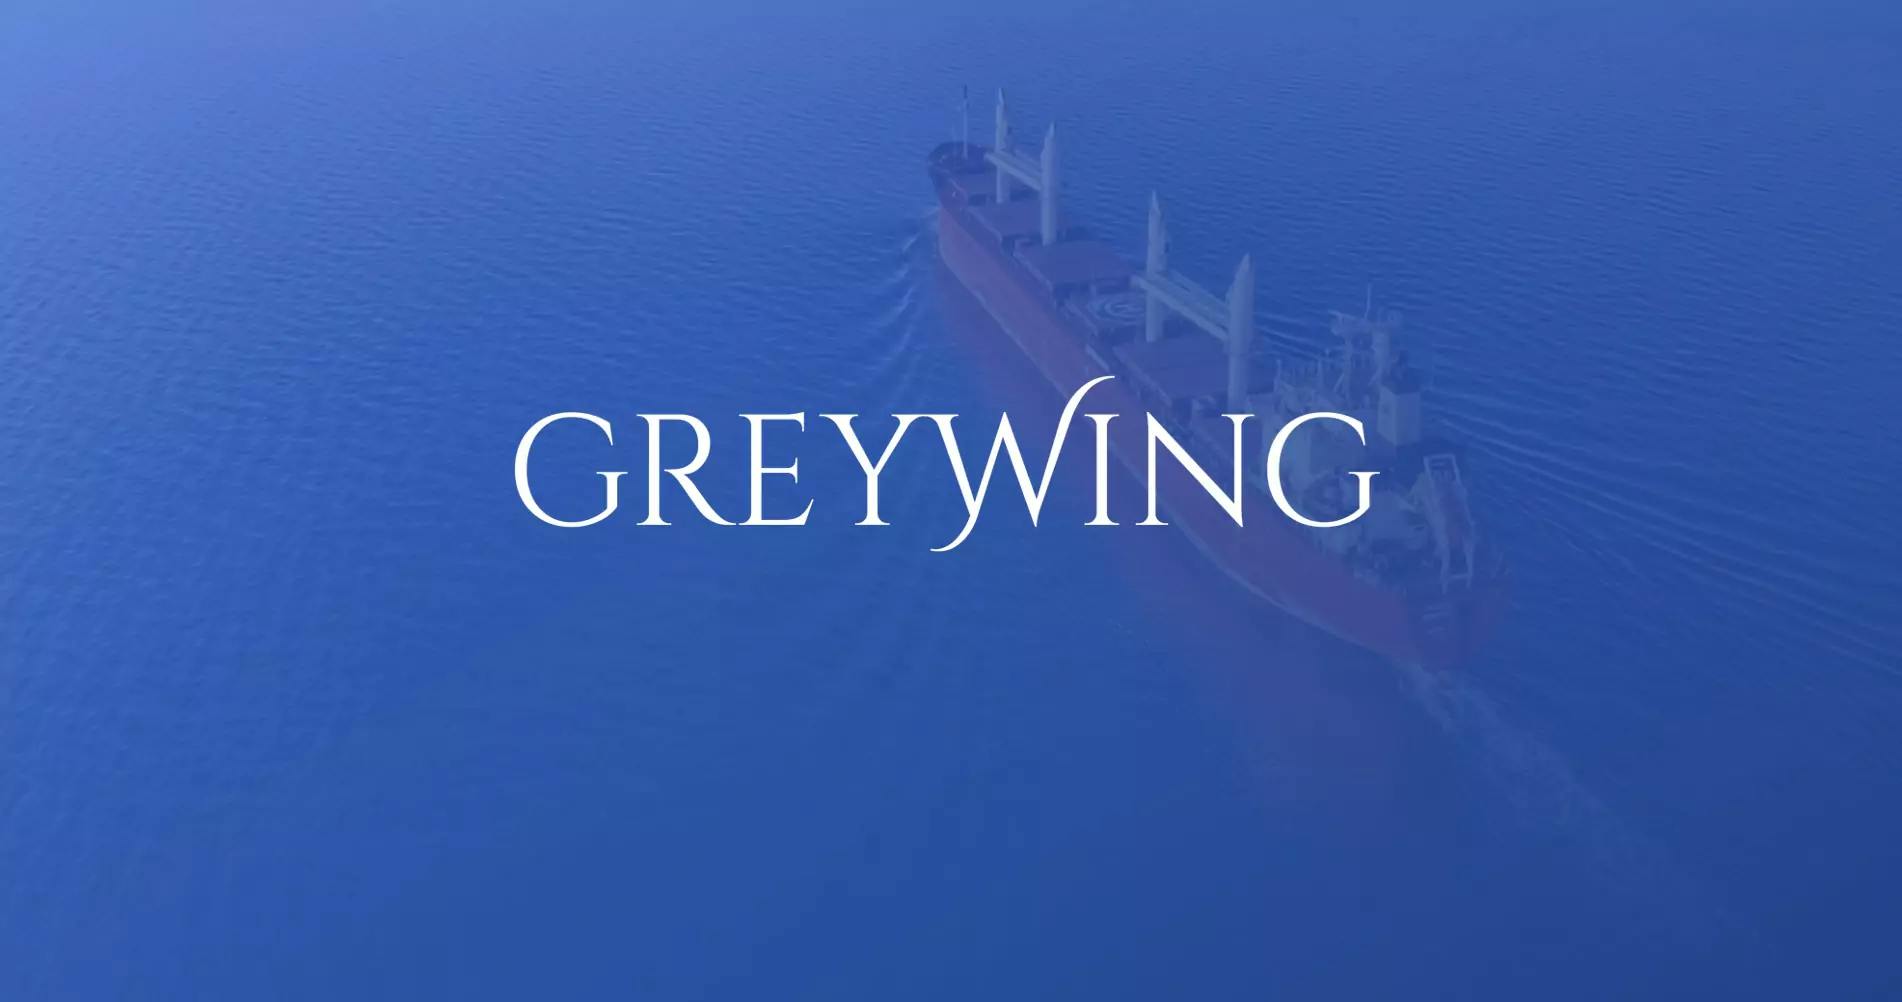 The Greywing Story